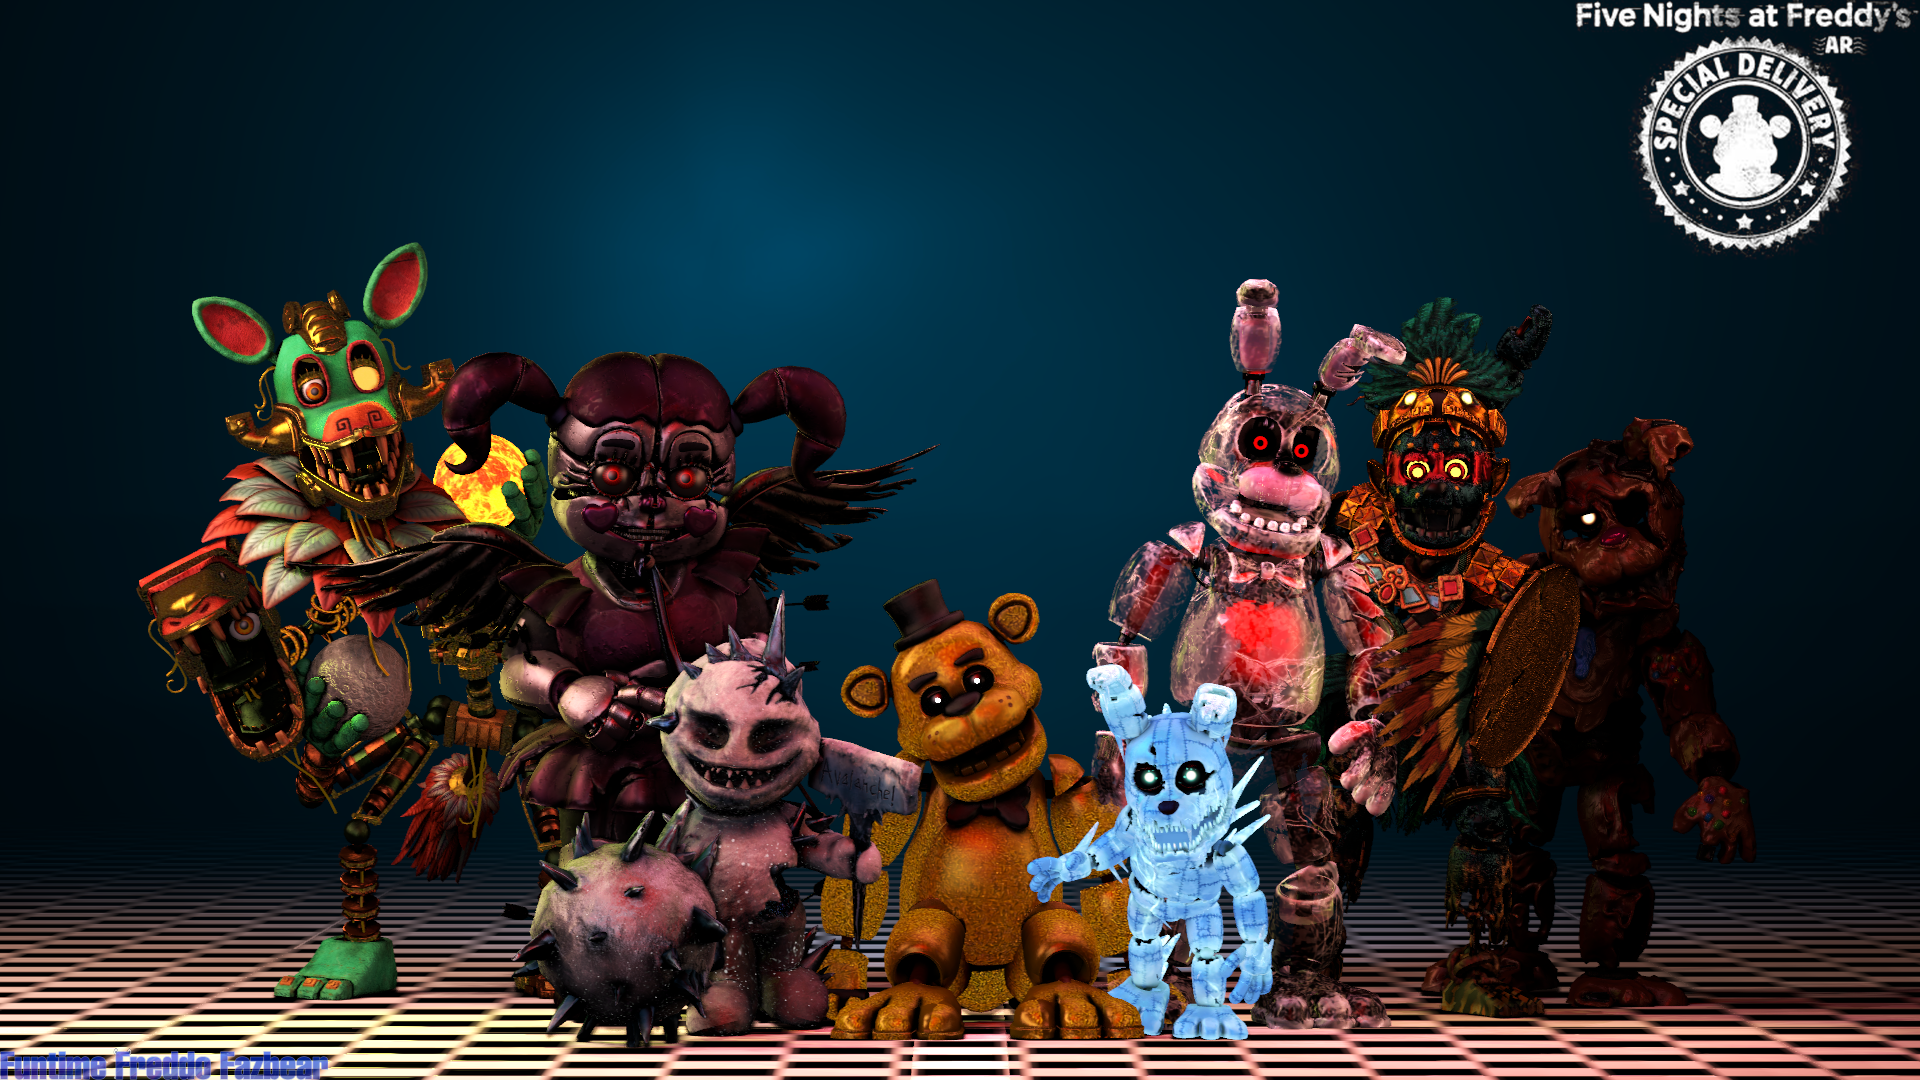 Will there be an R-rated cut of Five Nights at Freddy's? - Dexerto